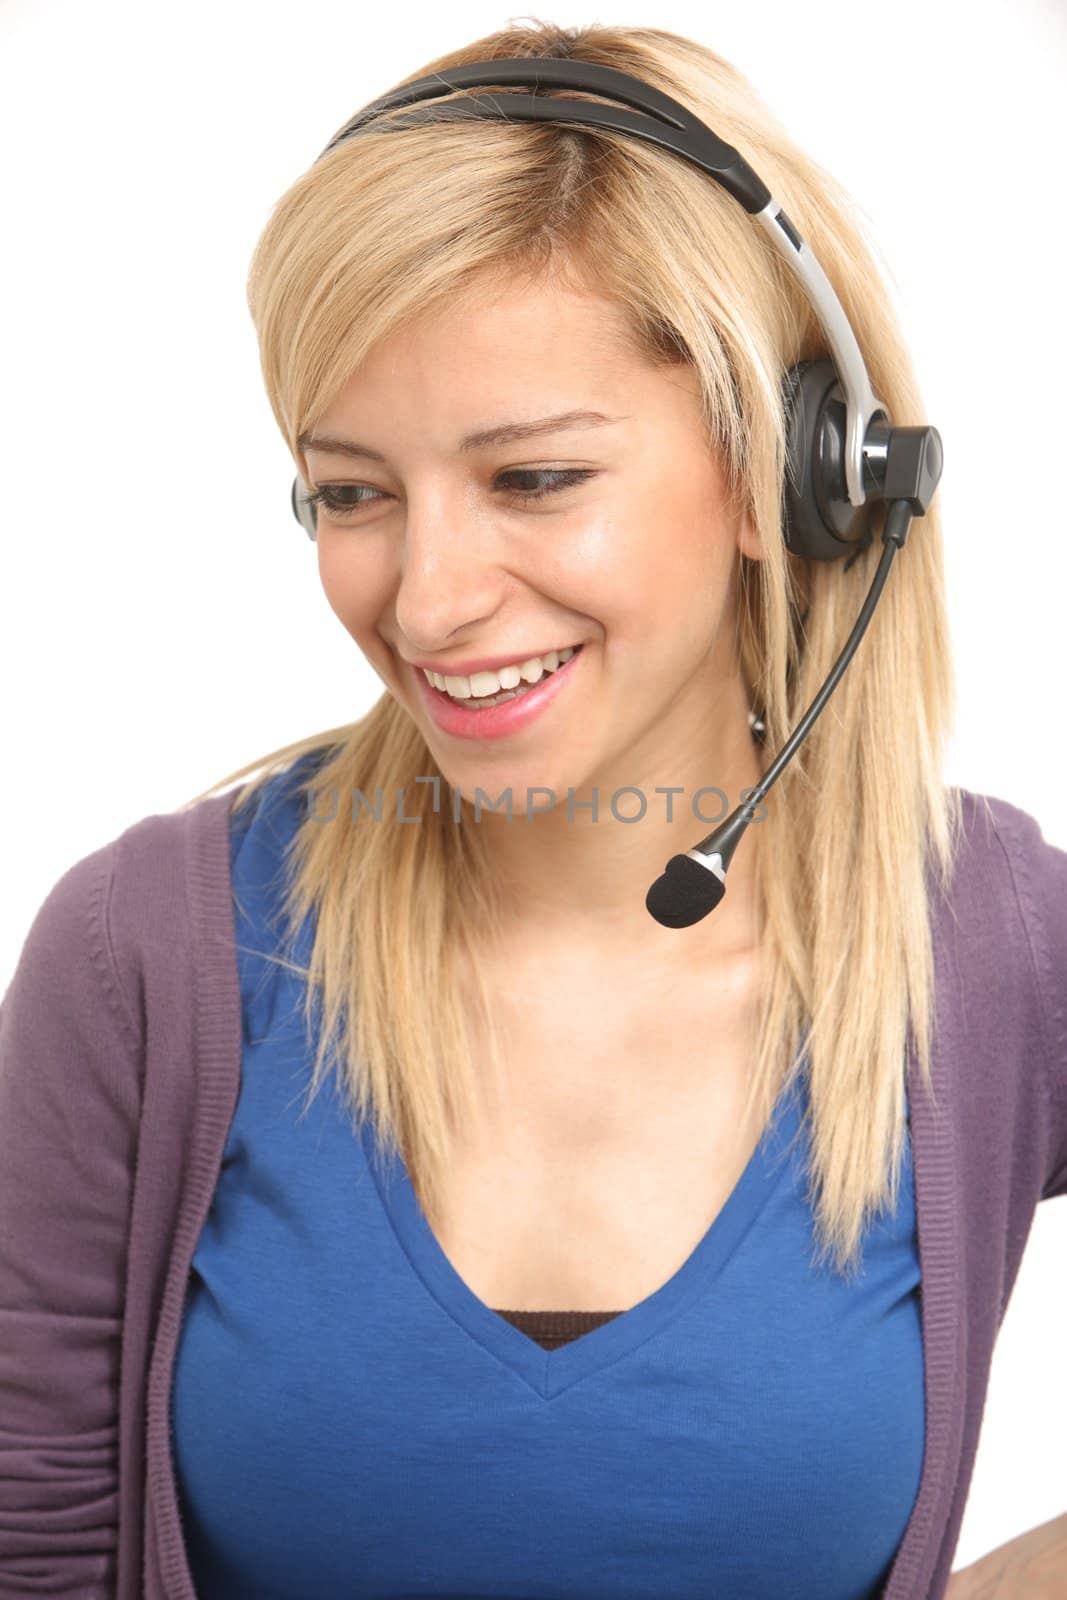 Customer care assistant by shamtor